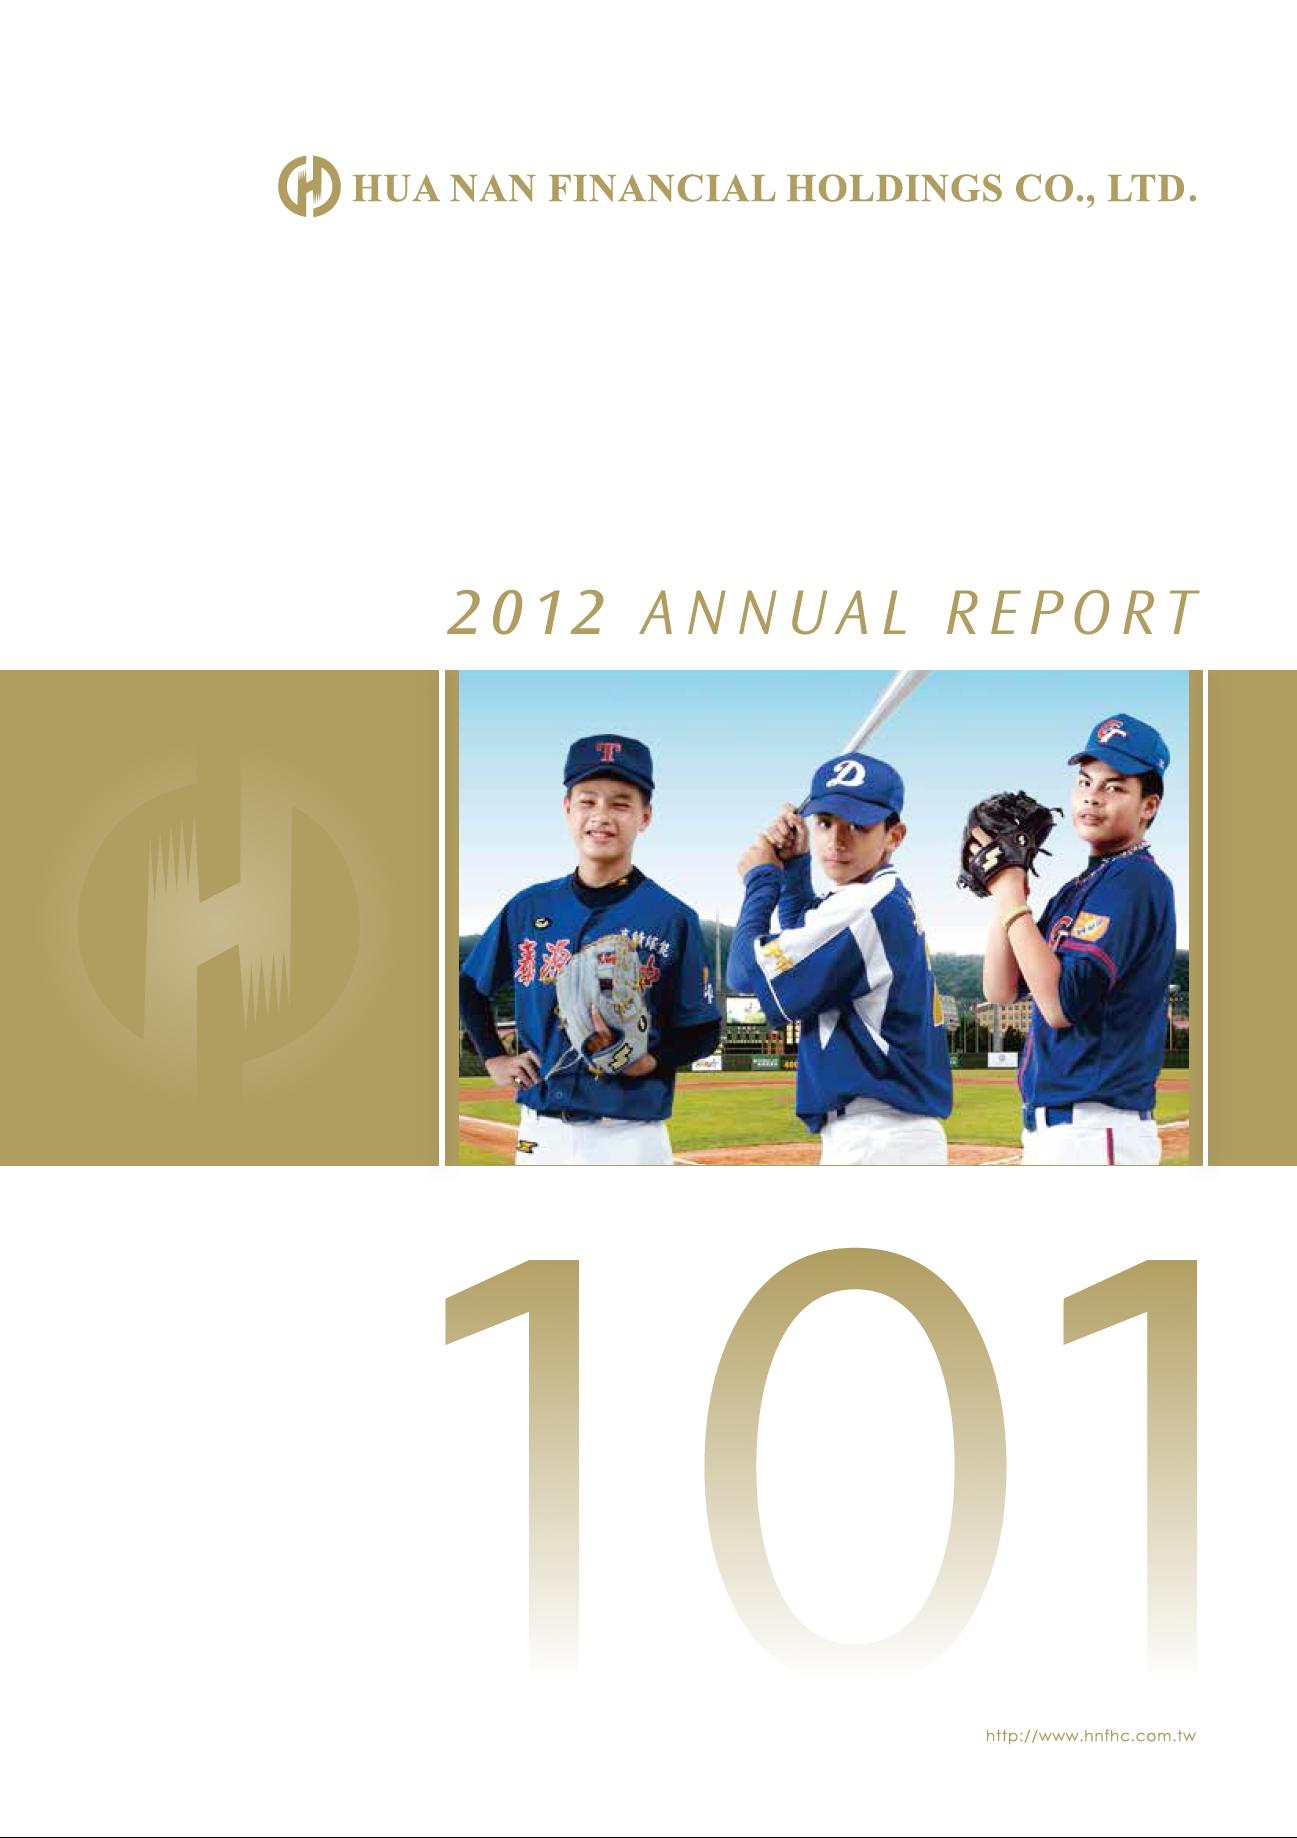 The cover of 2012 Annual Reports